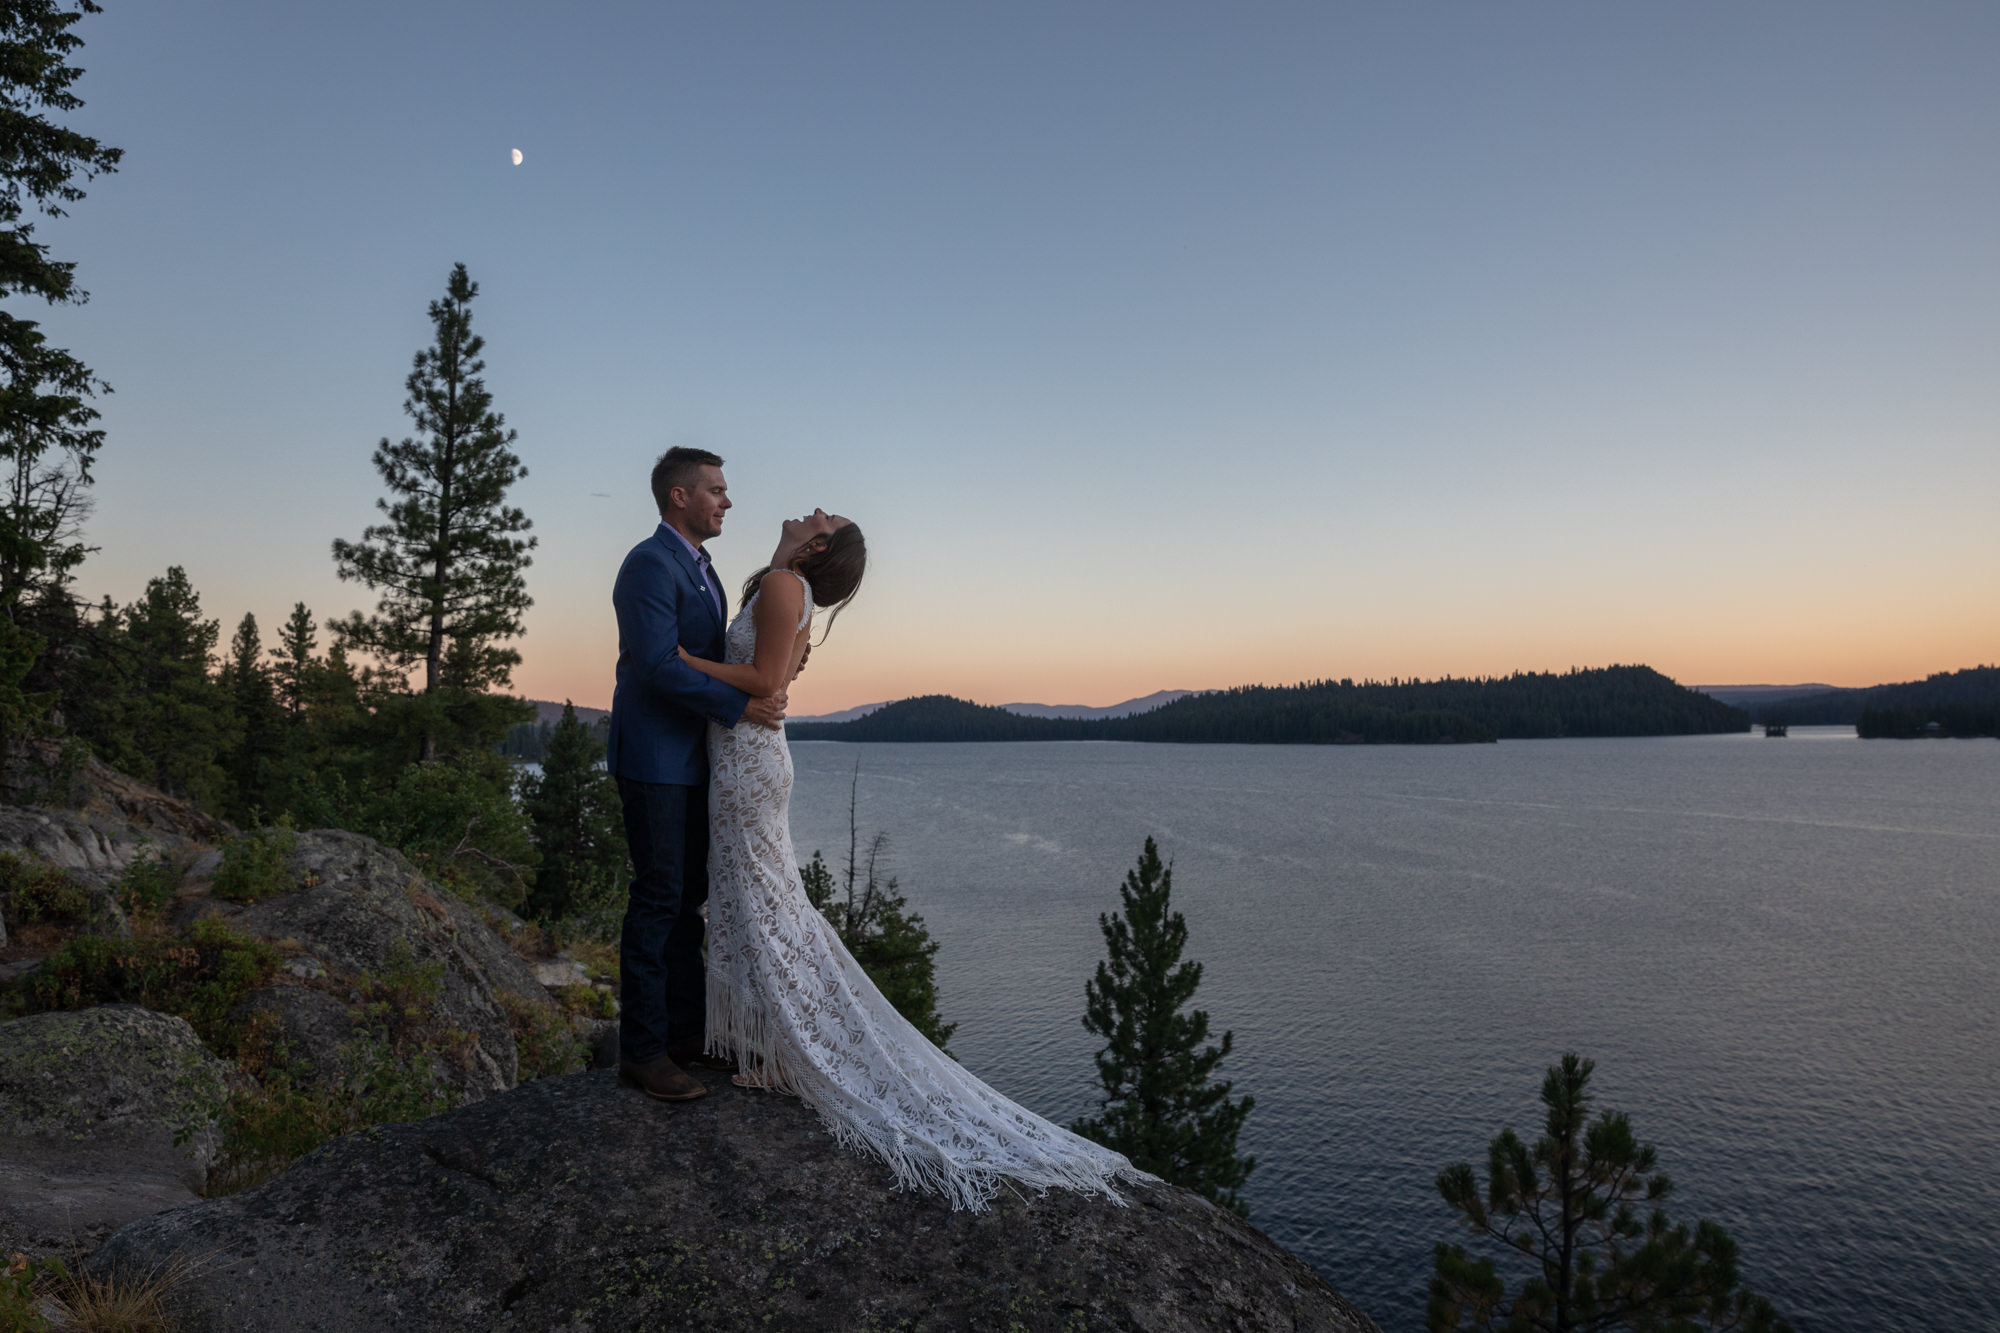 A bride throws her head back laughing as her groom holds her and they stand next to a lake after figuring out how to elope in idaho.